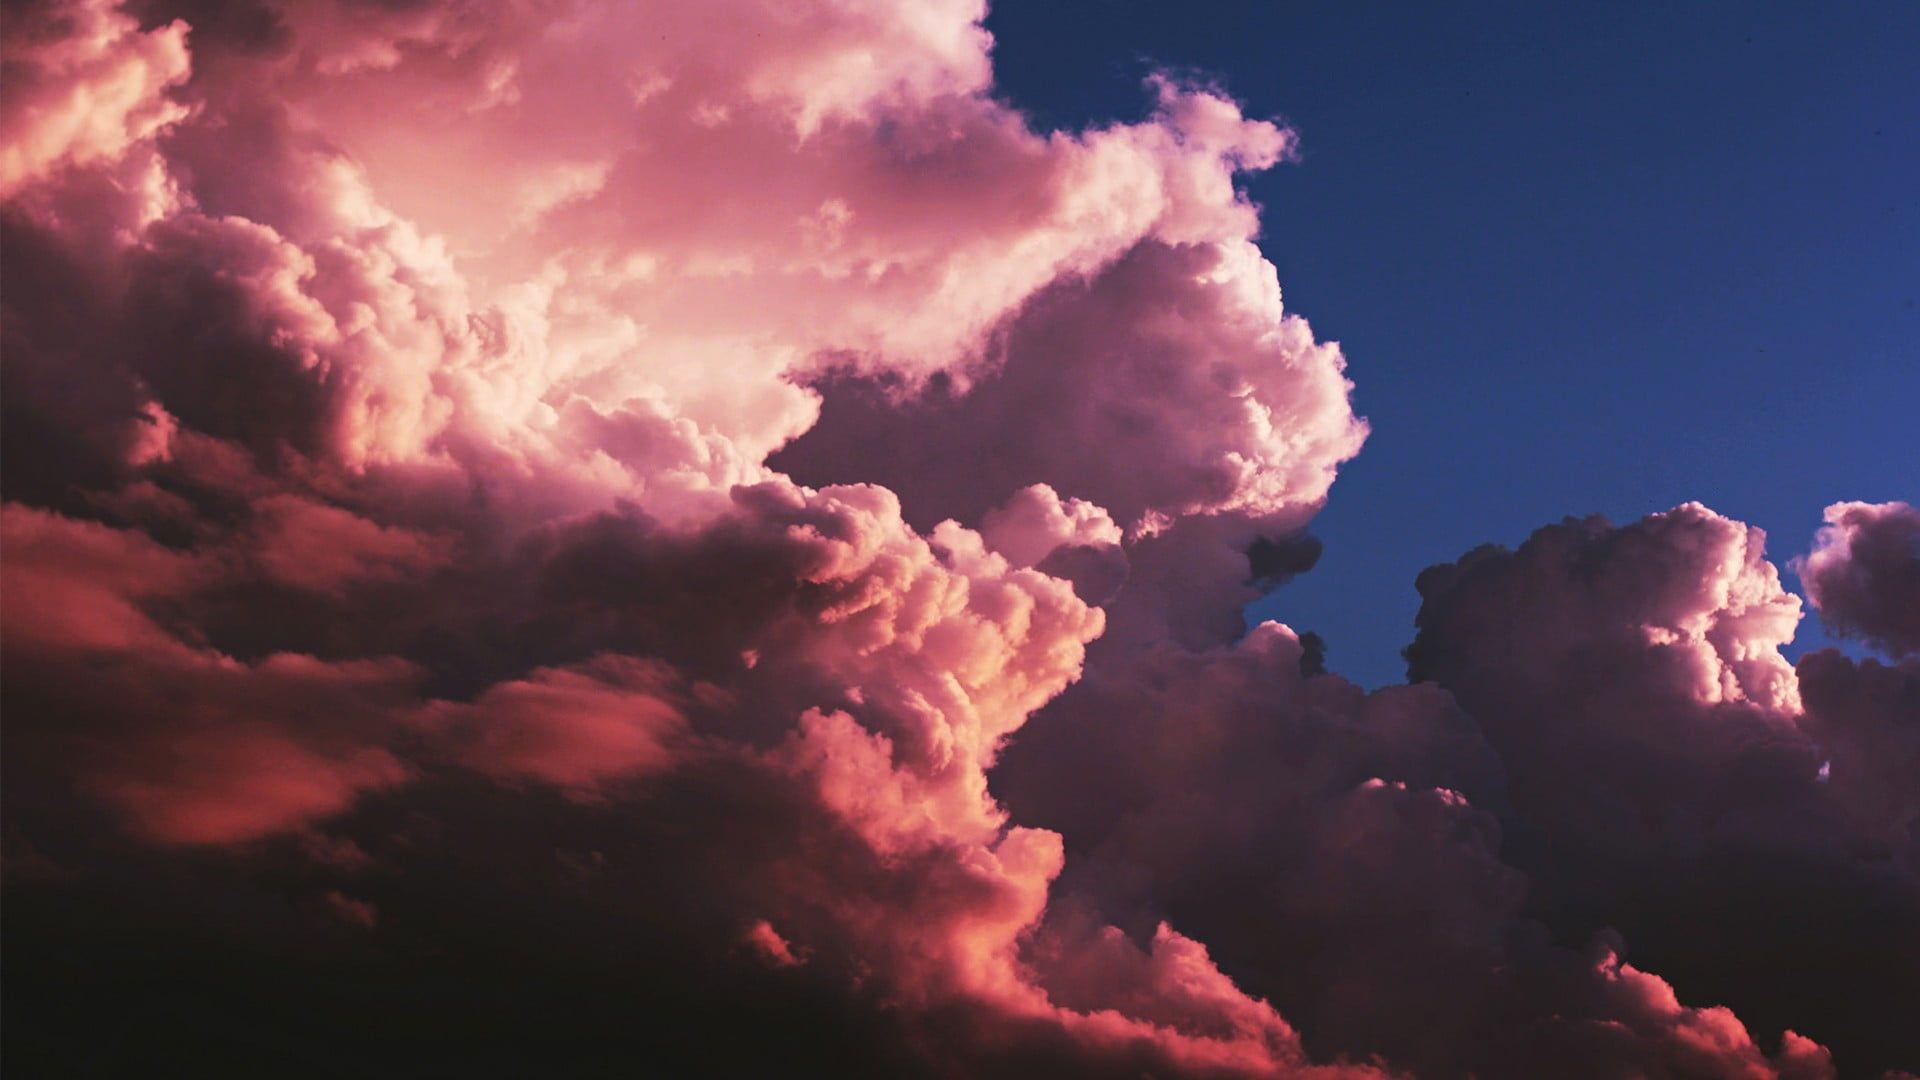 25 Top pink aesthetic wallpaper laptop clouds You Can Download It For ...